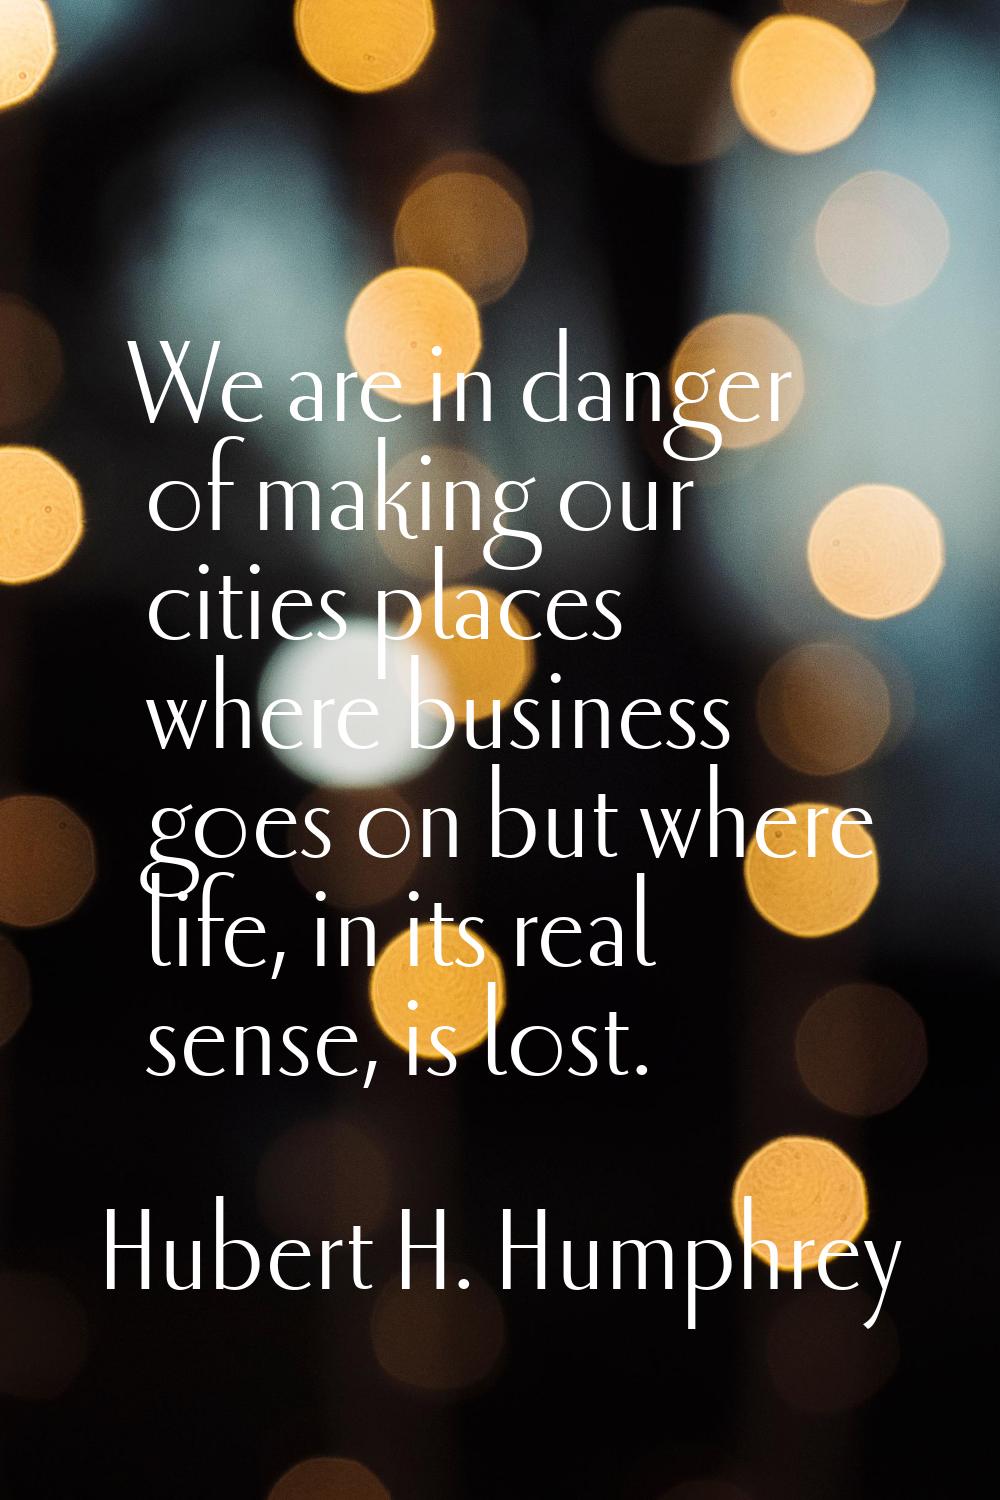 We are in danger of making our cities places where business goes on but where life, in its real sen